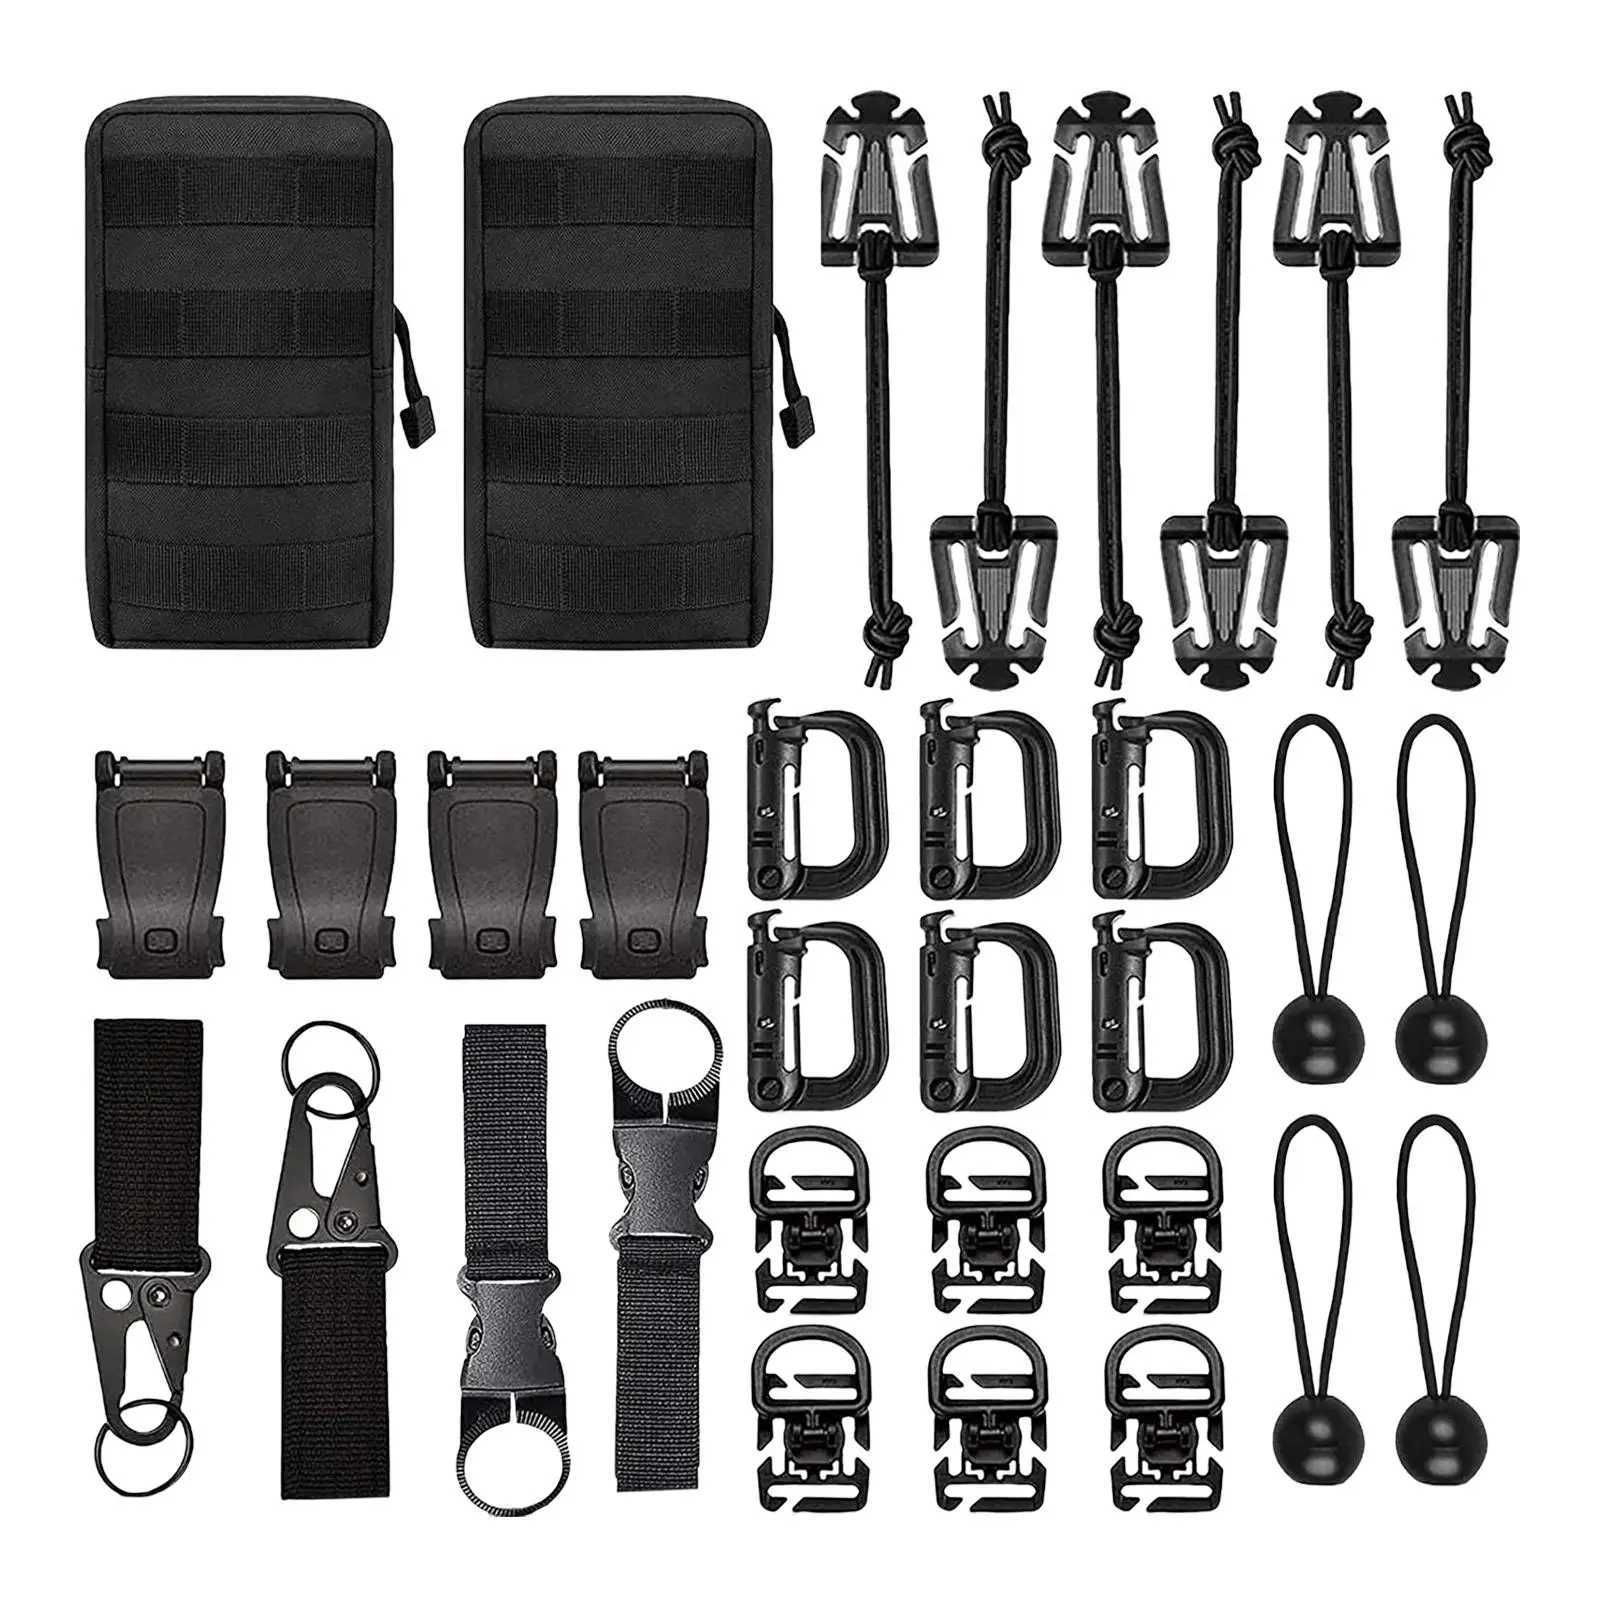 Molle Accessories Kit Attachments Waterproof Backpack Waist Bag Pouch for Running